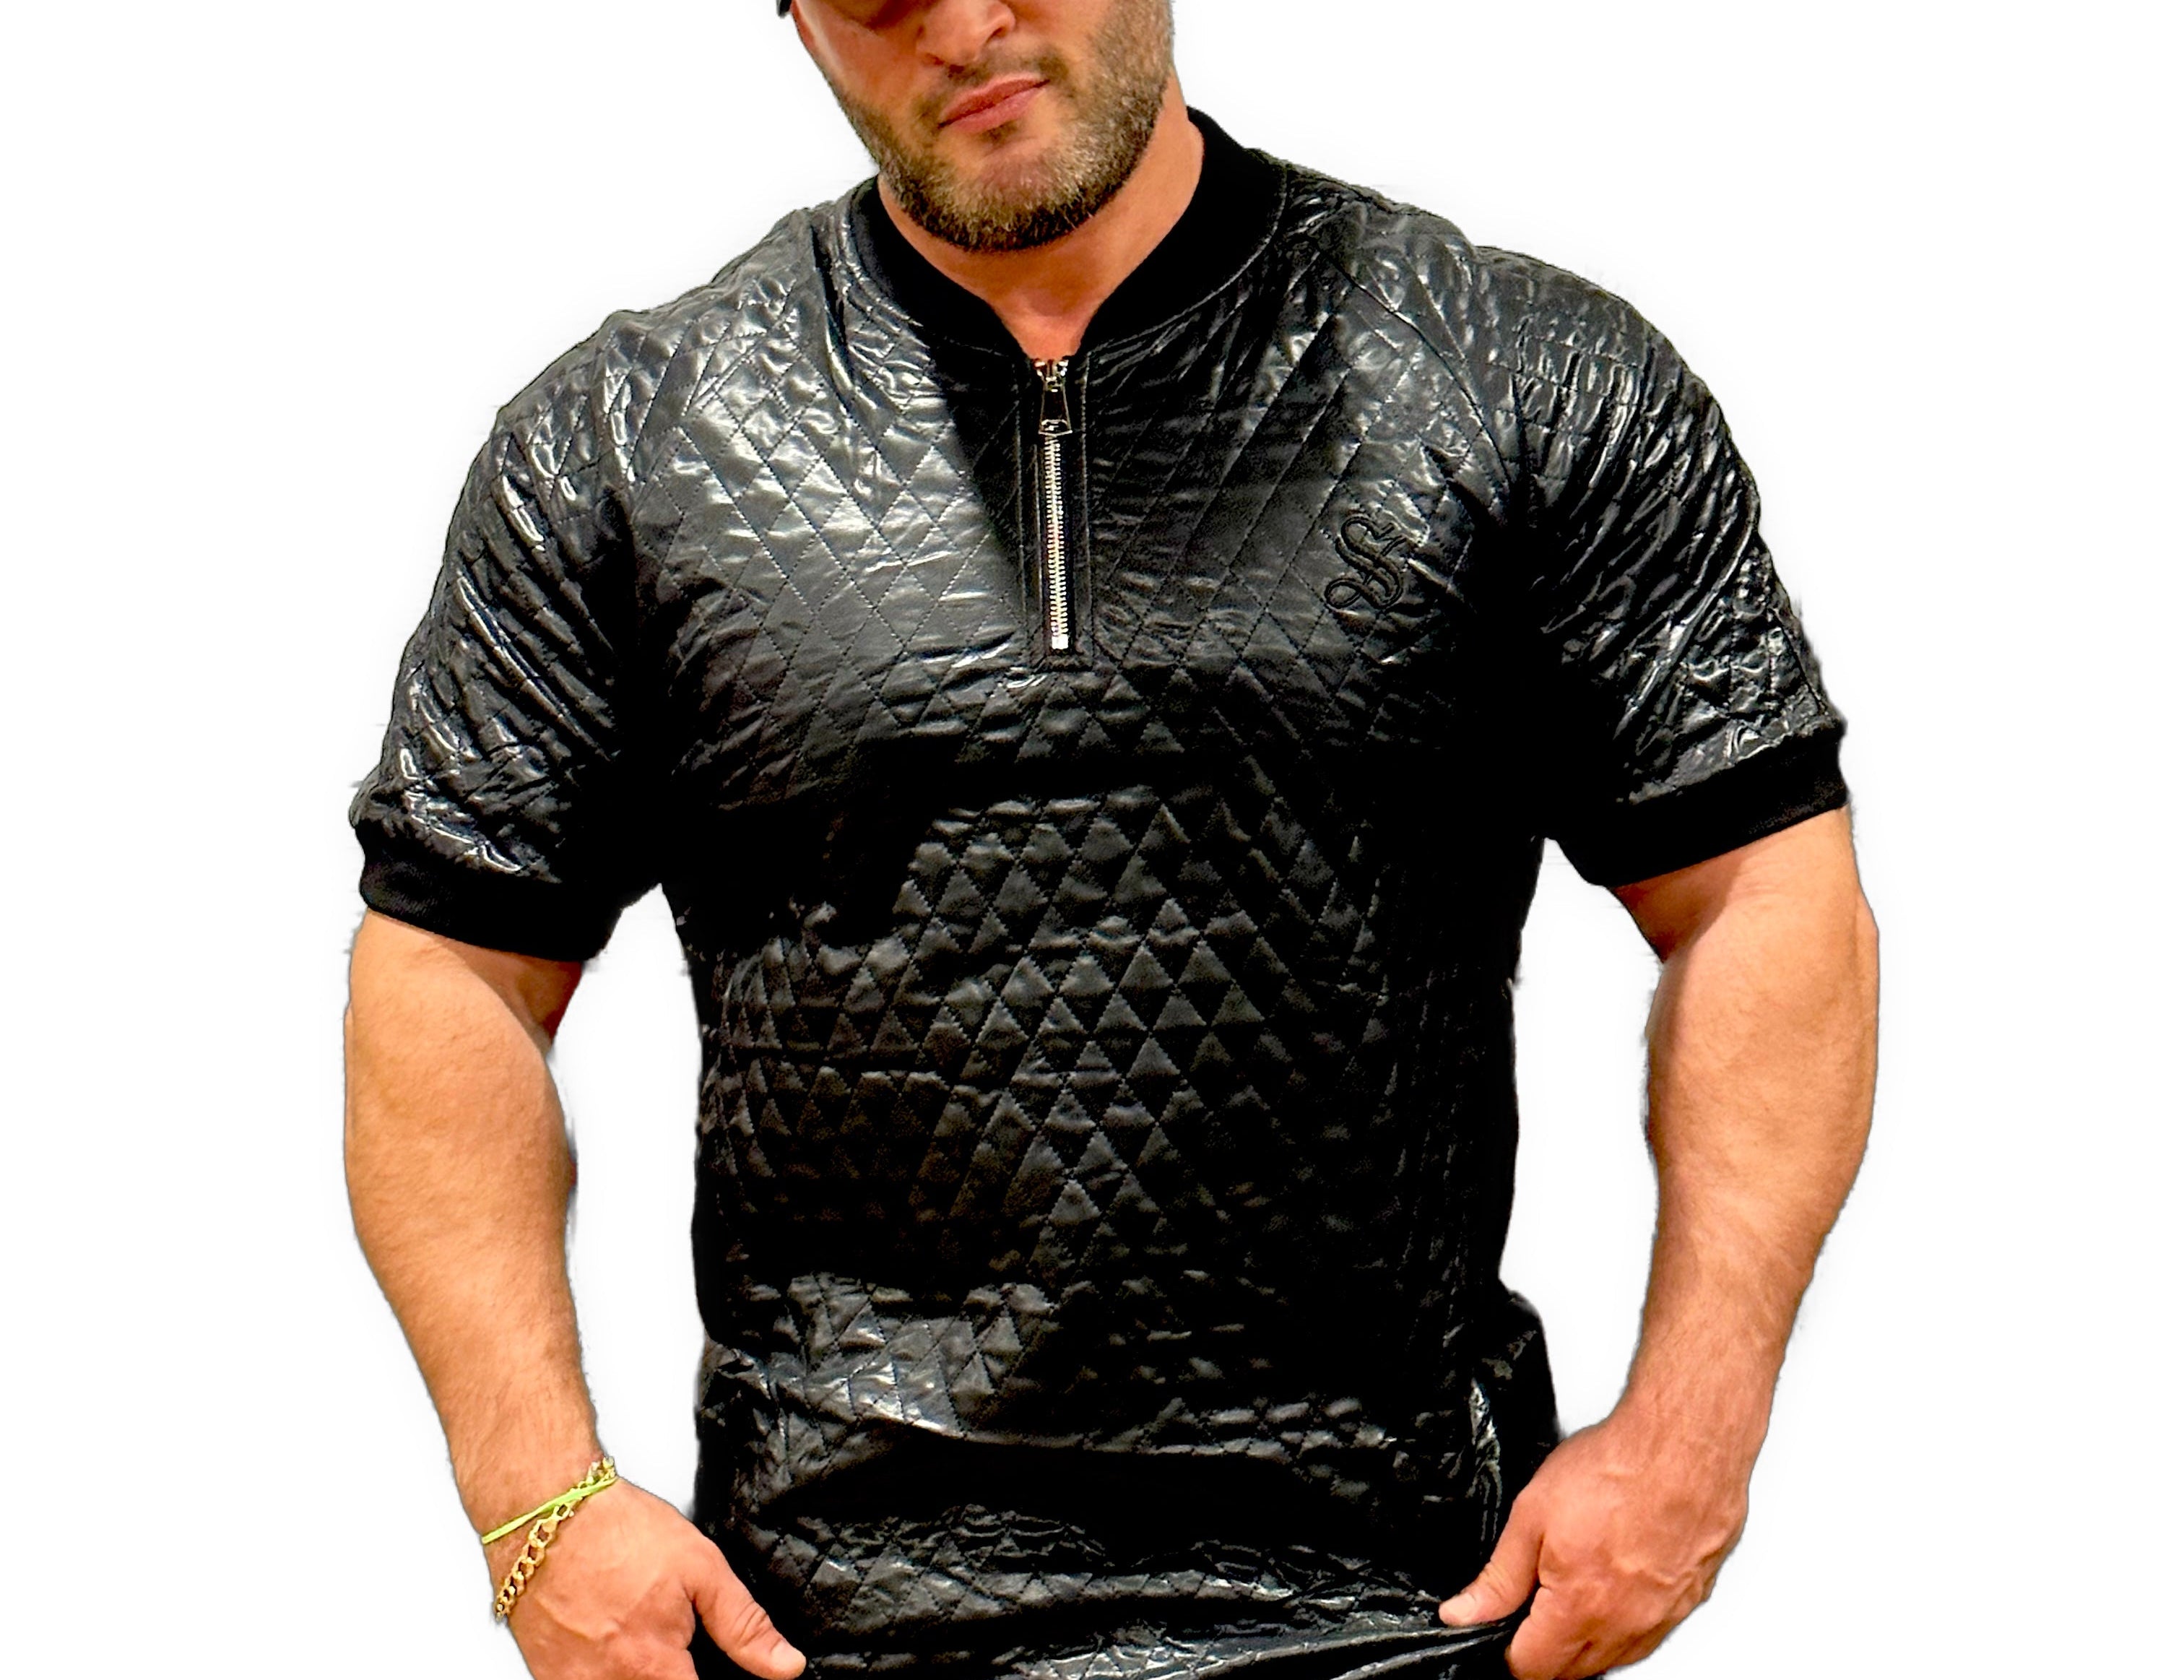 Romex - Zip Tee in Black for Men - Sarman Fashion - Wholesale Clothing Fashion Brand for Men from Canada